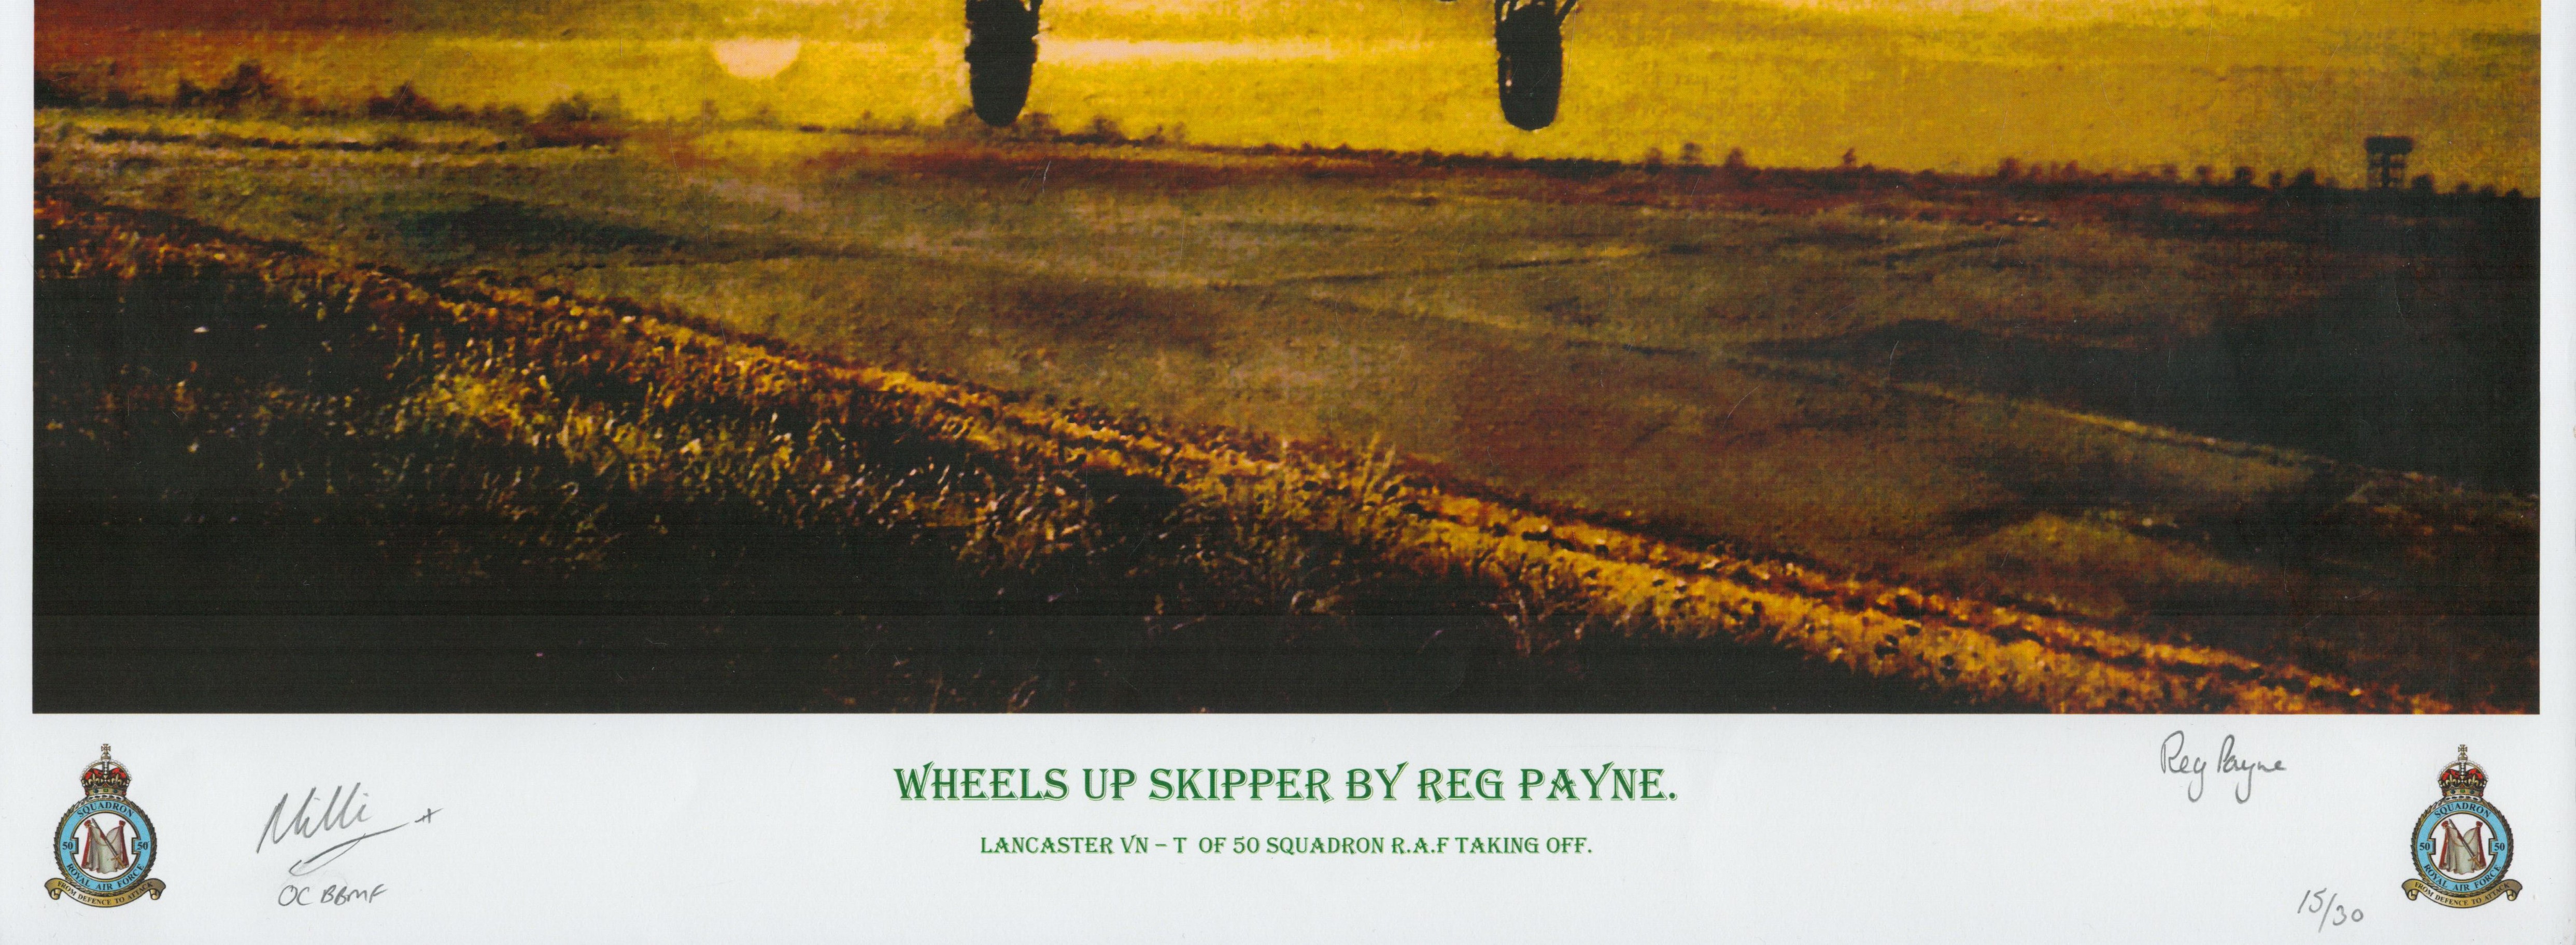 Wheels up skipper print by Reg Payne signed by 1. Numbered 15 of 30. Reg Payne was RAF flight crew - Image 2 of 2